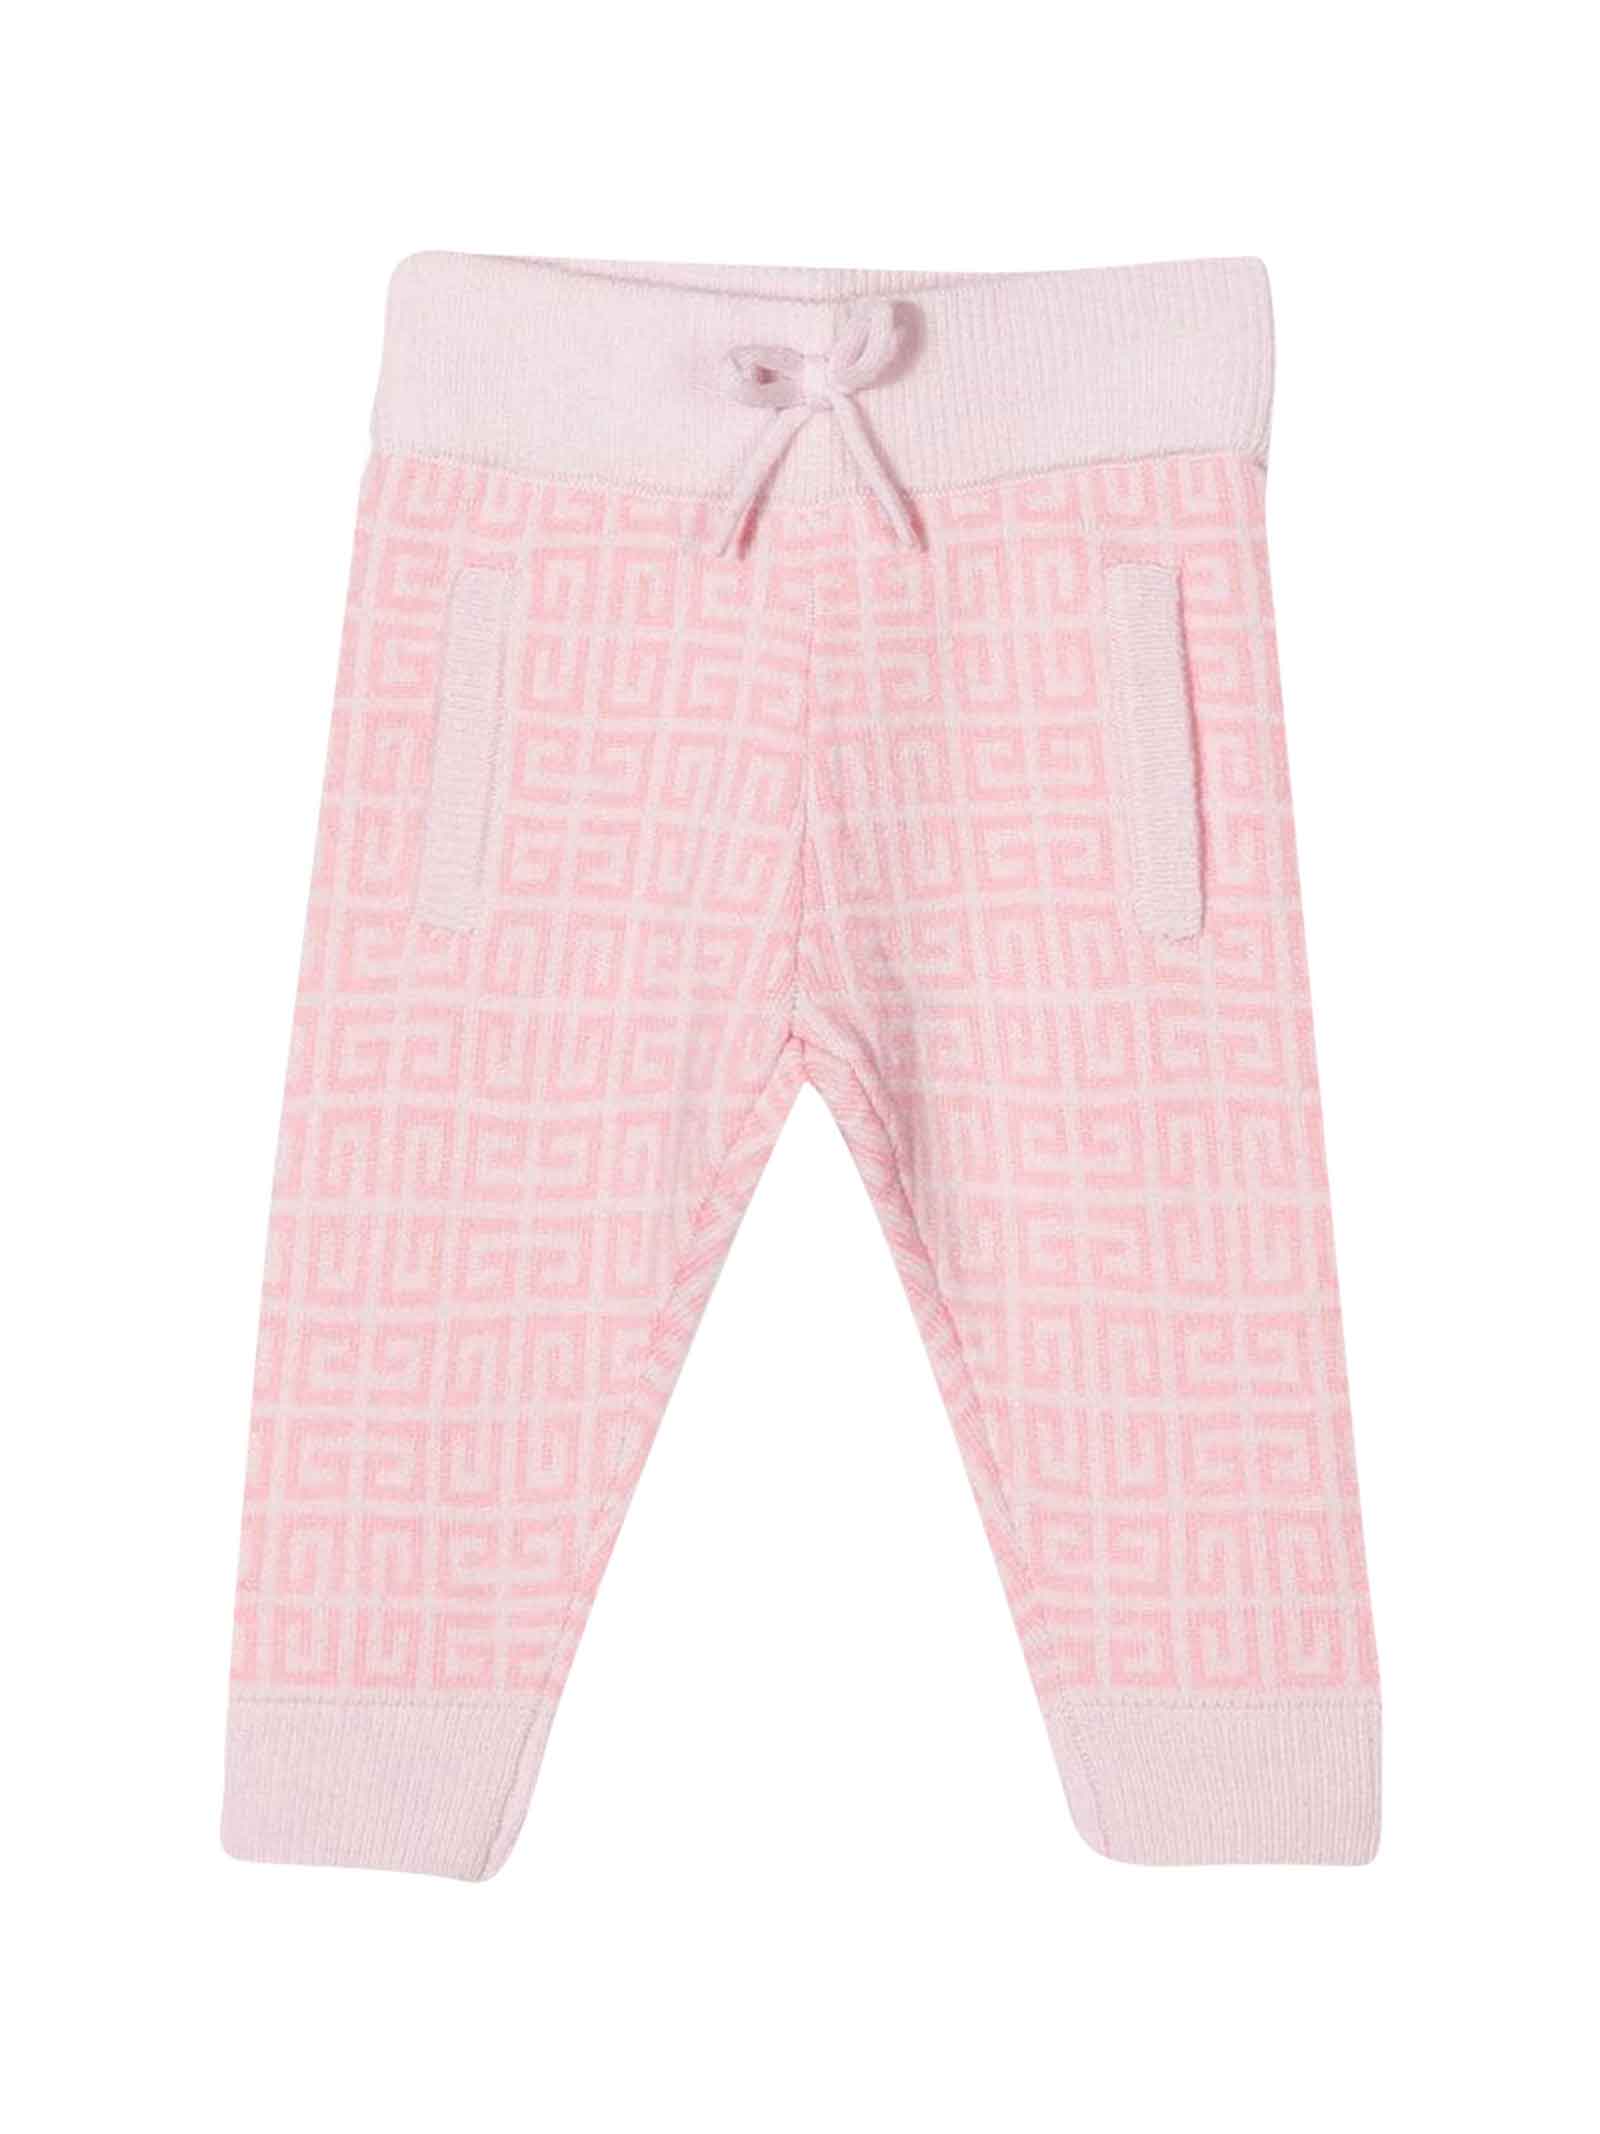 Givenchy Pink Leggings Baby Girl